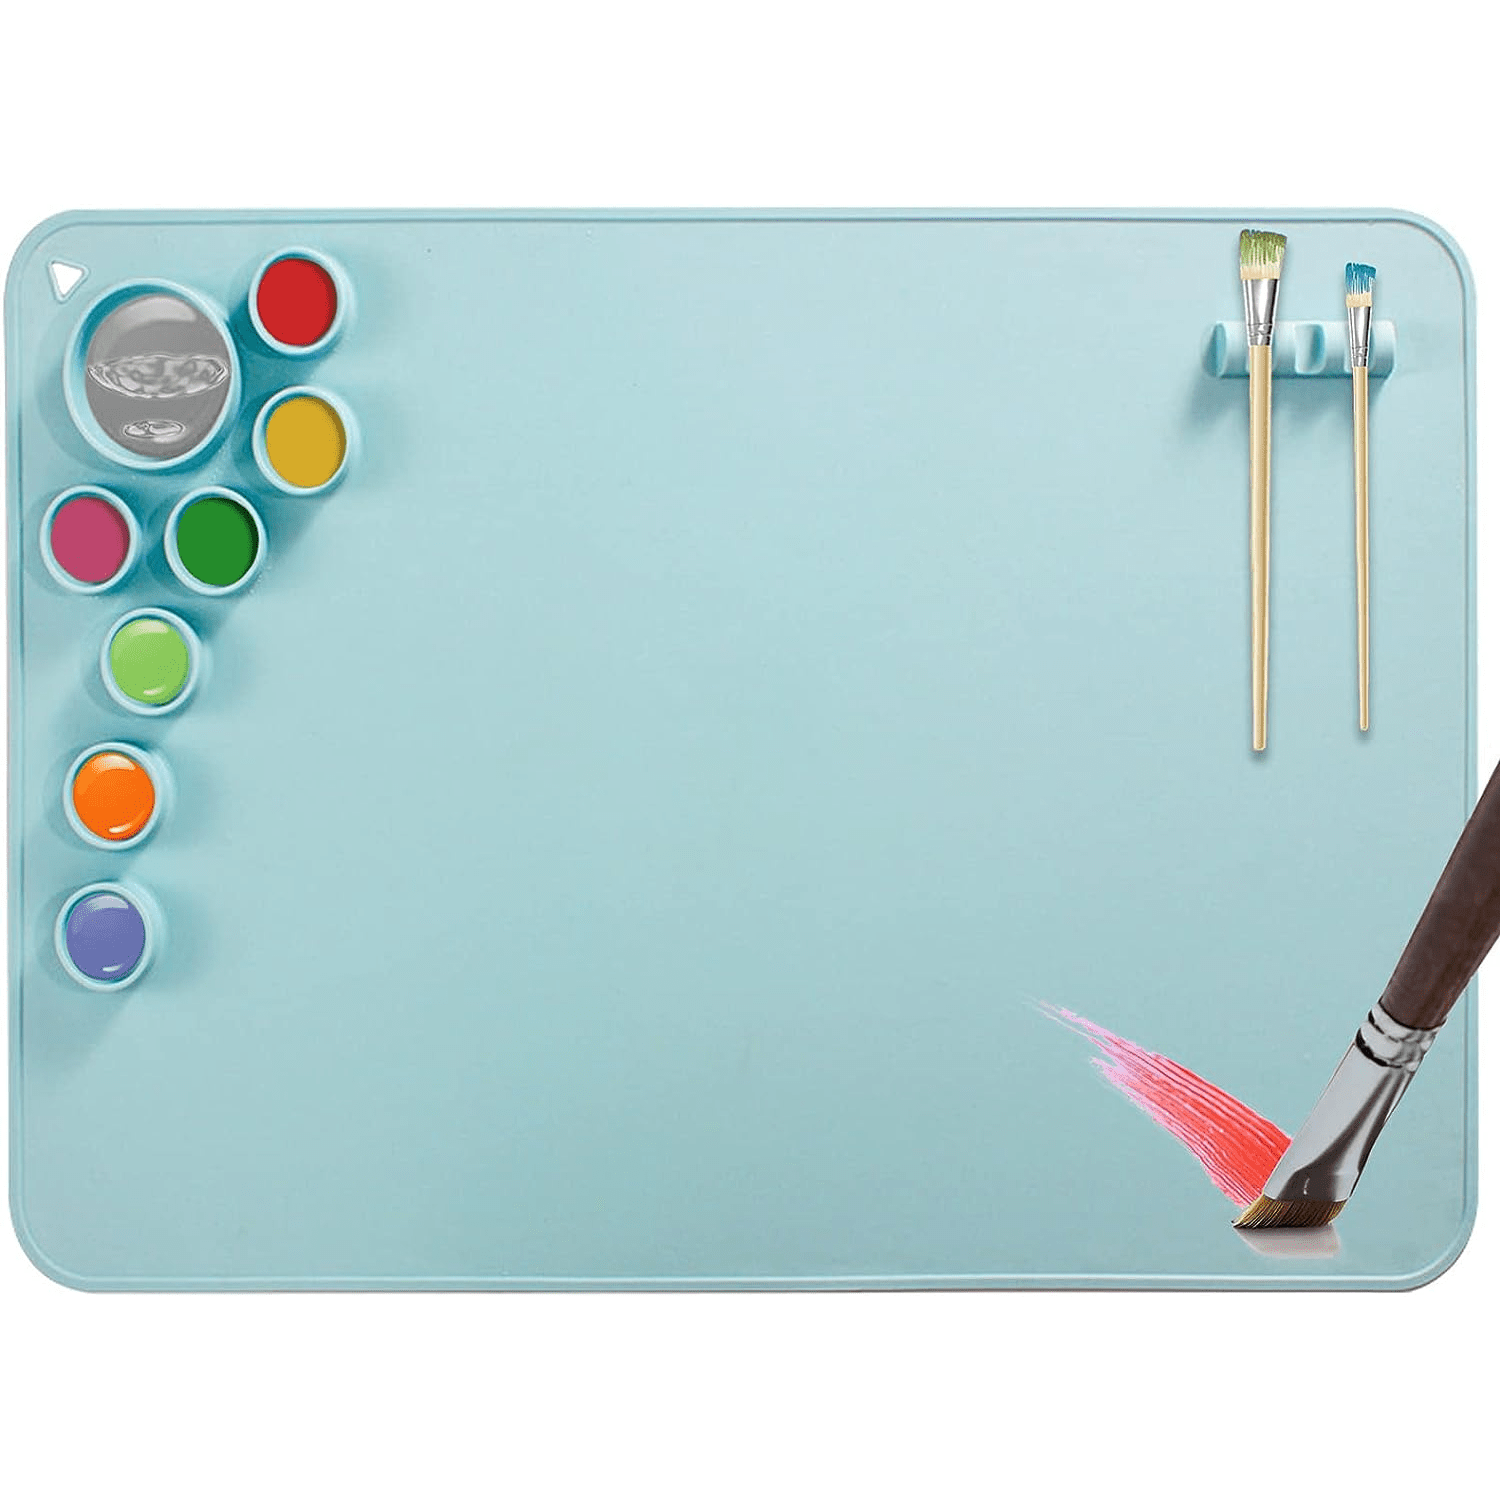 Silicone Craft Mat, Silicone Mat for Resin Casting, 20x16non Stick Silicone Sheet, Creator Silicone Craft Mat with Cleaning Cup for Painting, Art, CLA